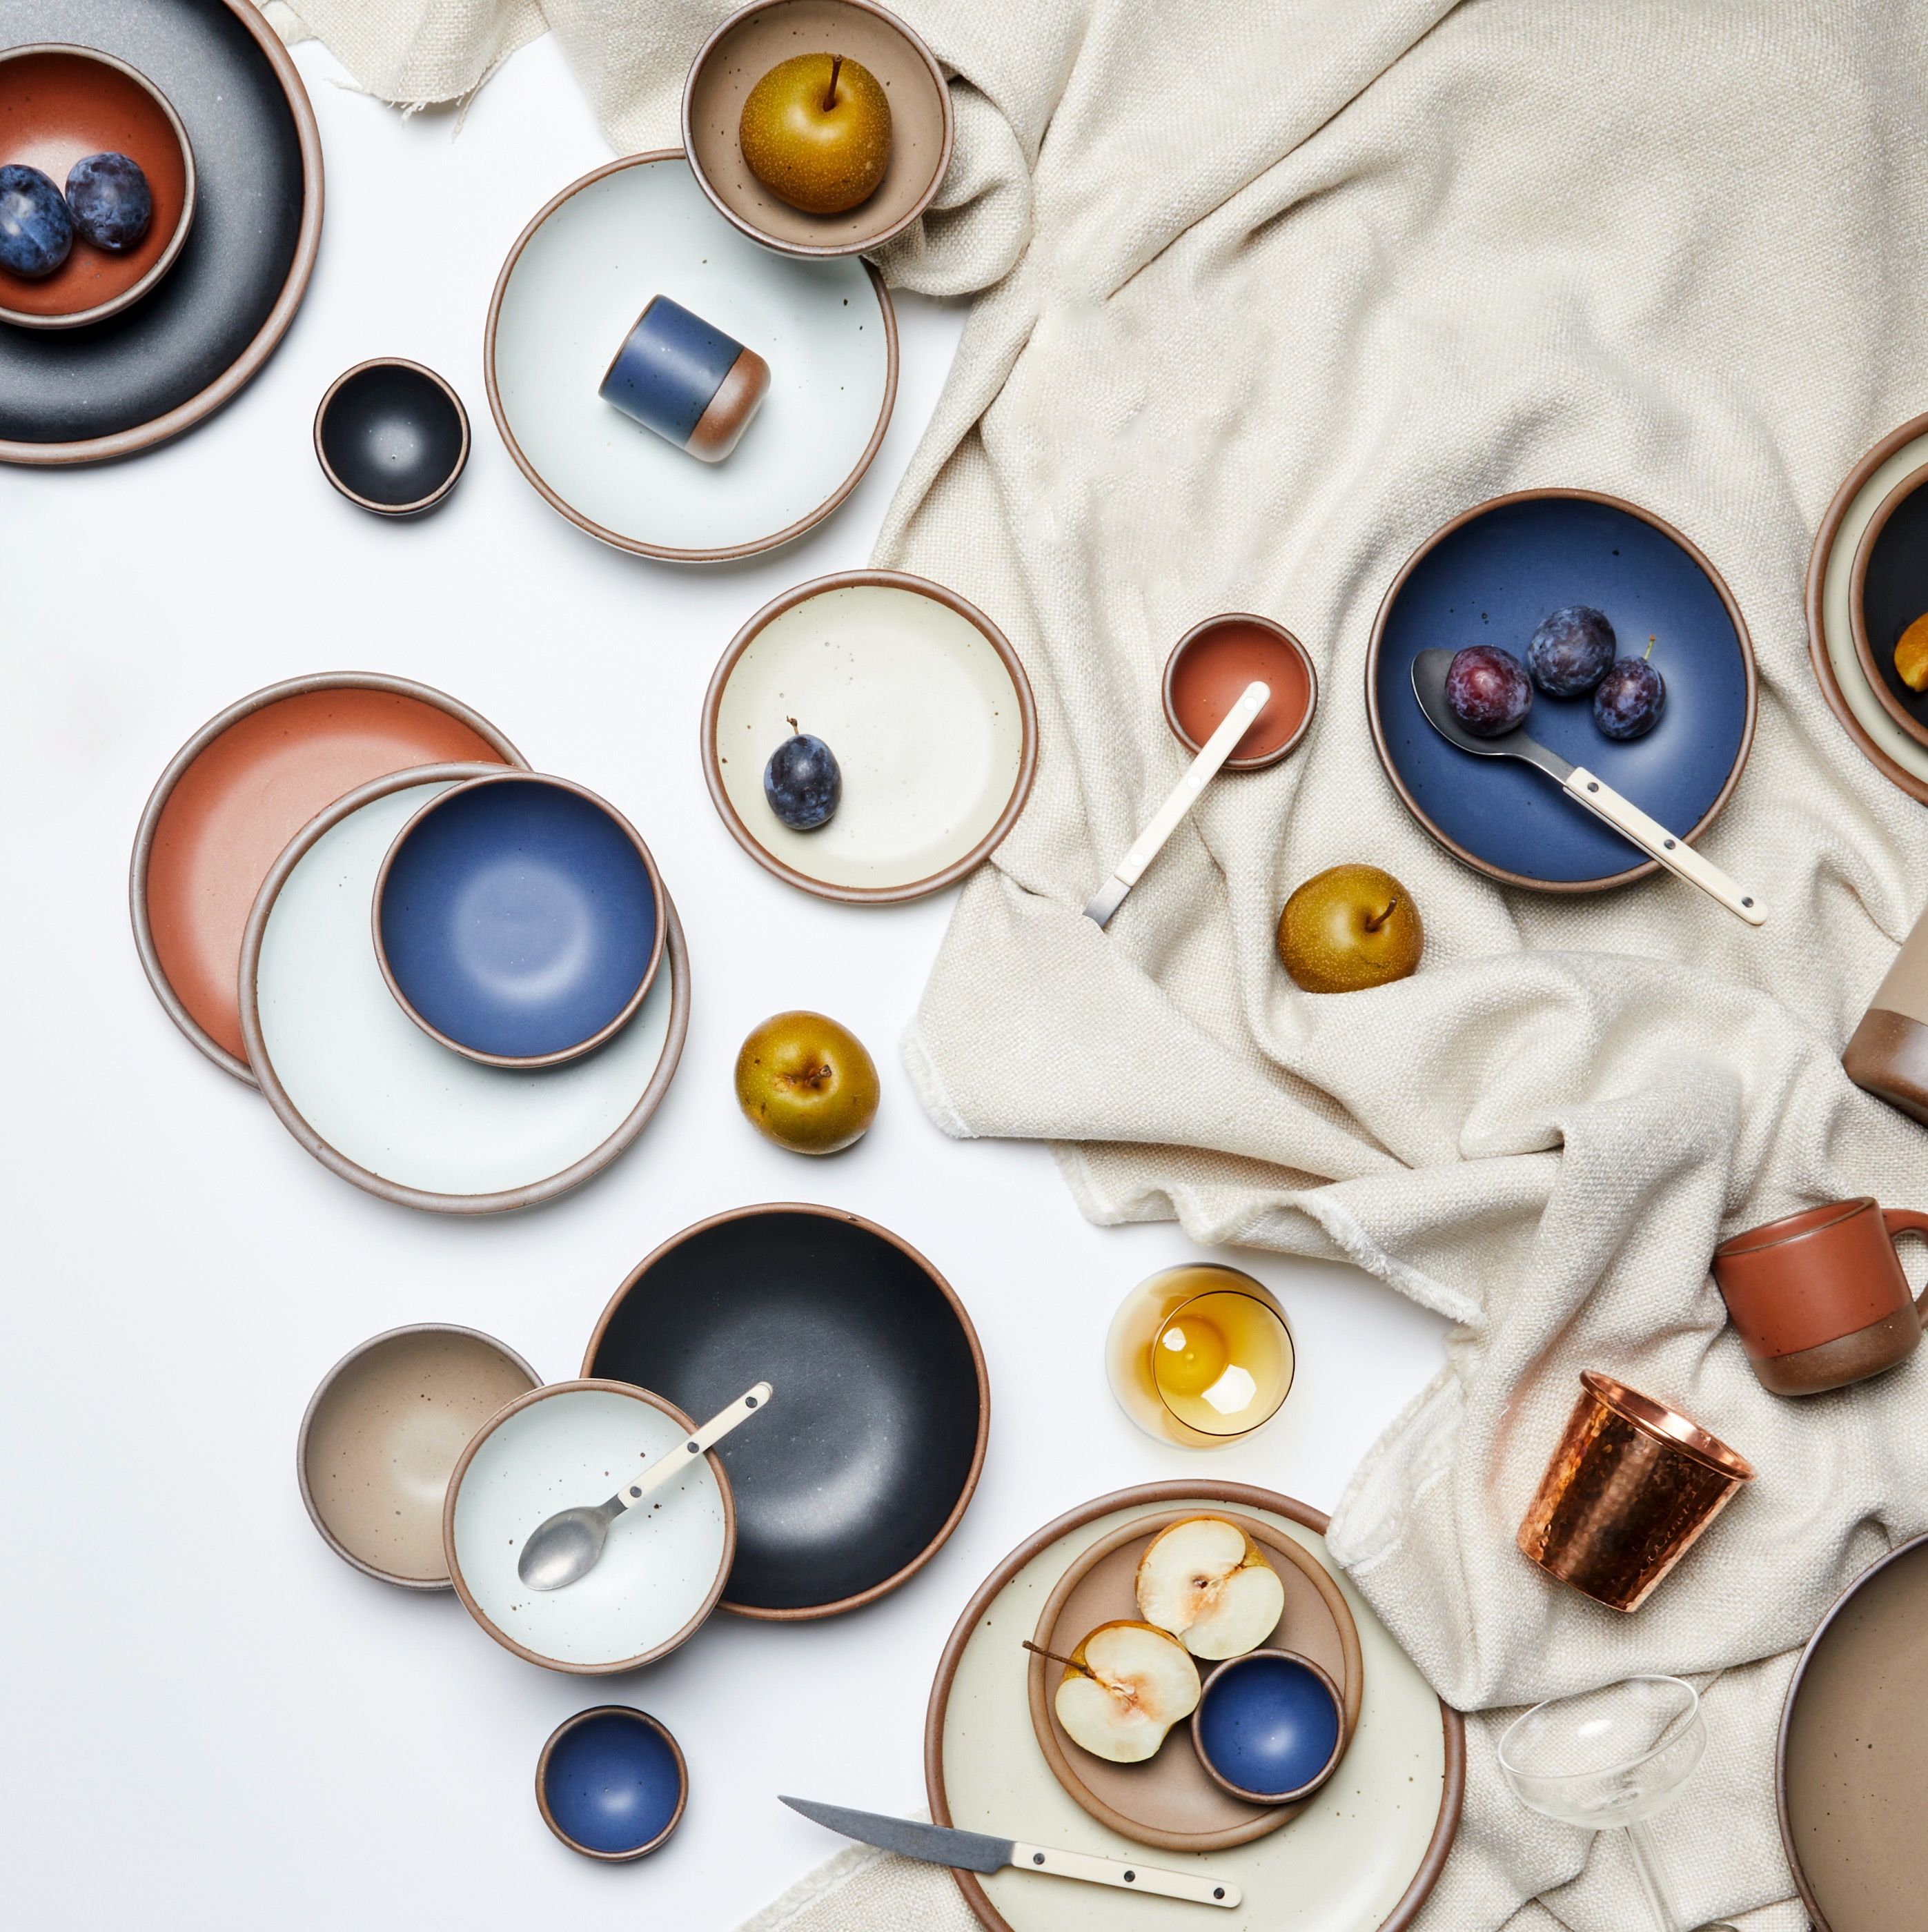 An overhead view of artfully arranged ceramic plates in neutral, blue, and terracotta colors, surrounded by various flatware, pears, glassware and more. All are artfully arranged with a white background and neutral fabric.